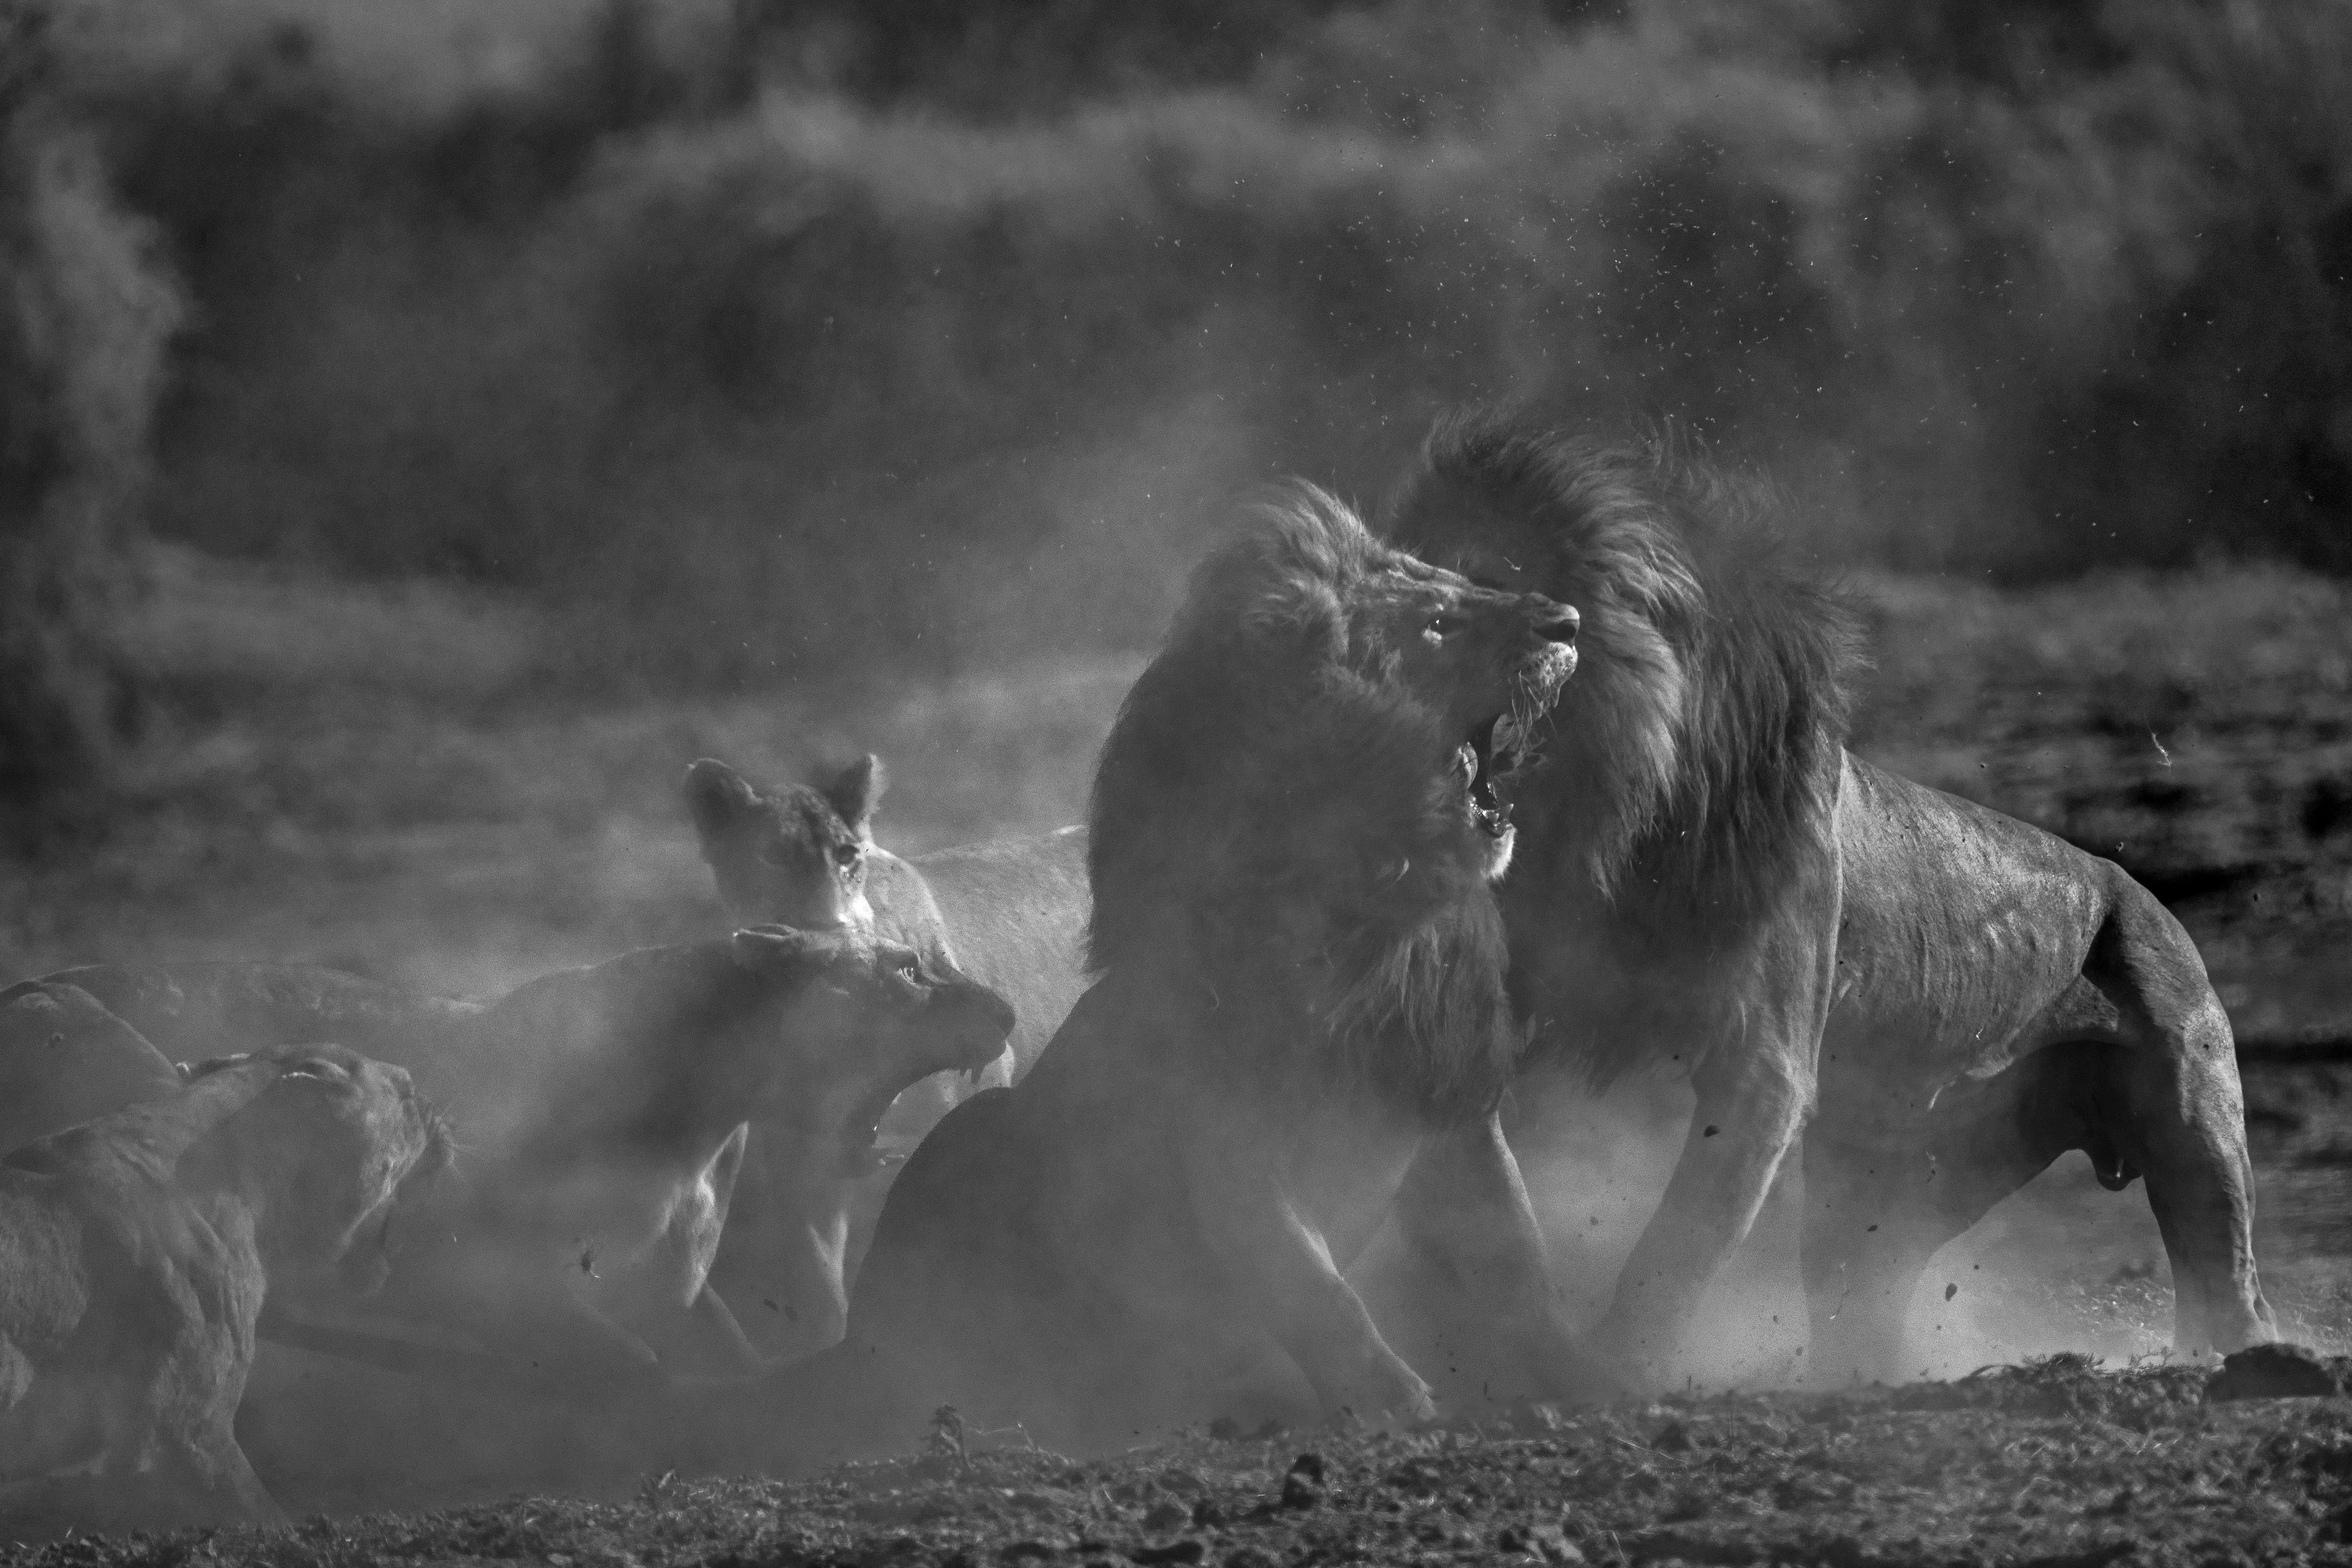 Aditya Dicky Singh Black and White Photograph - Animal Landscape Large Photograph Nature Africa Lions Wildlife Black and White